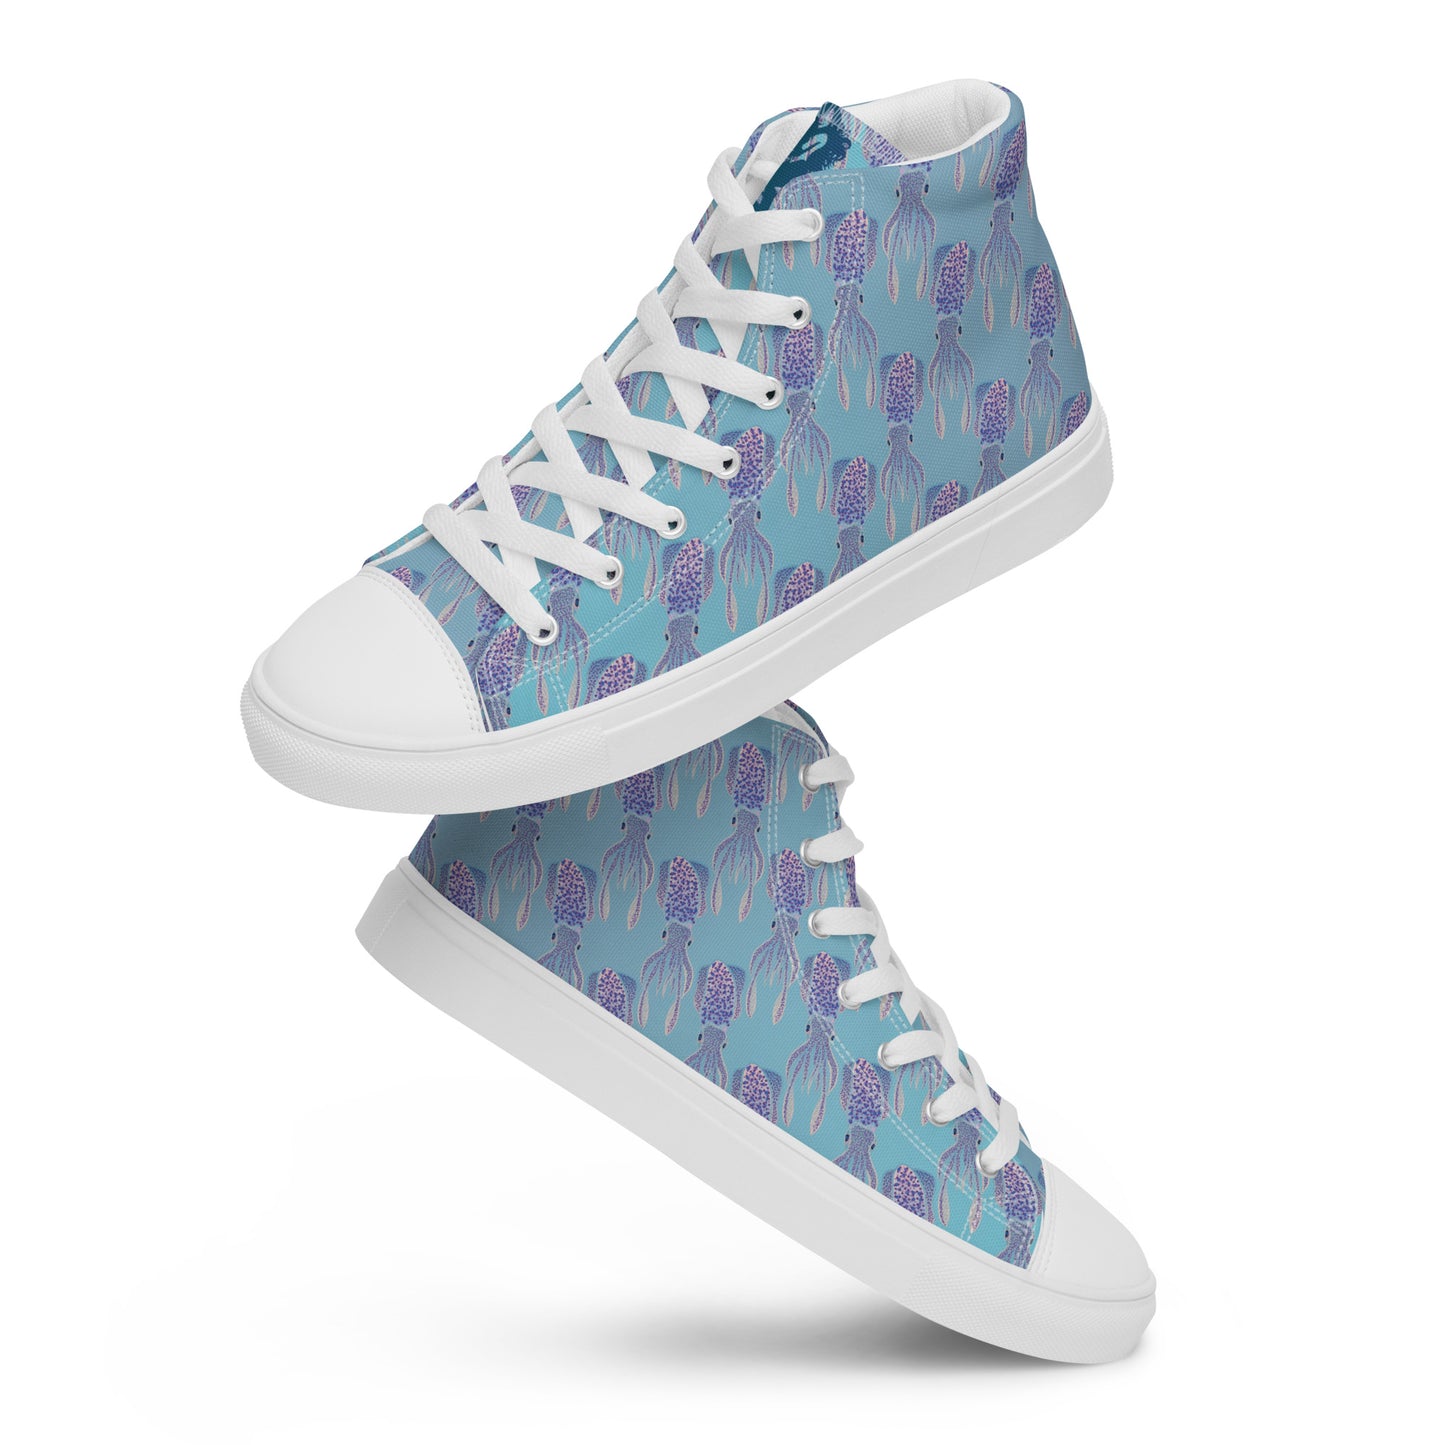 Itty Bitty Squiddy Women’s high top canvas shoes